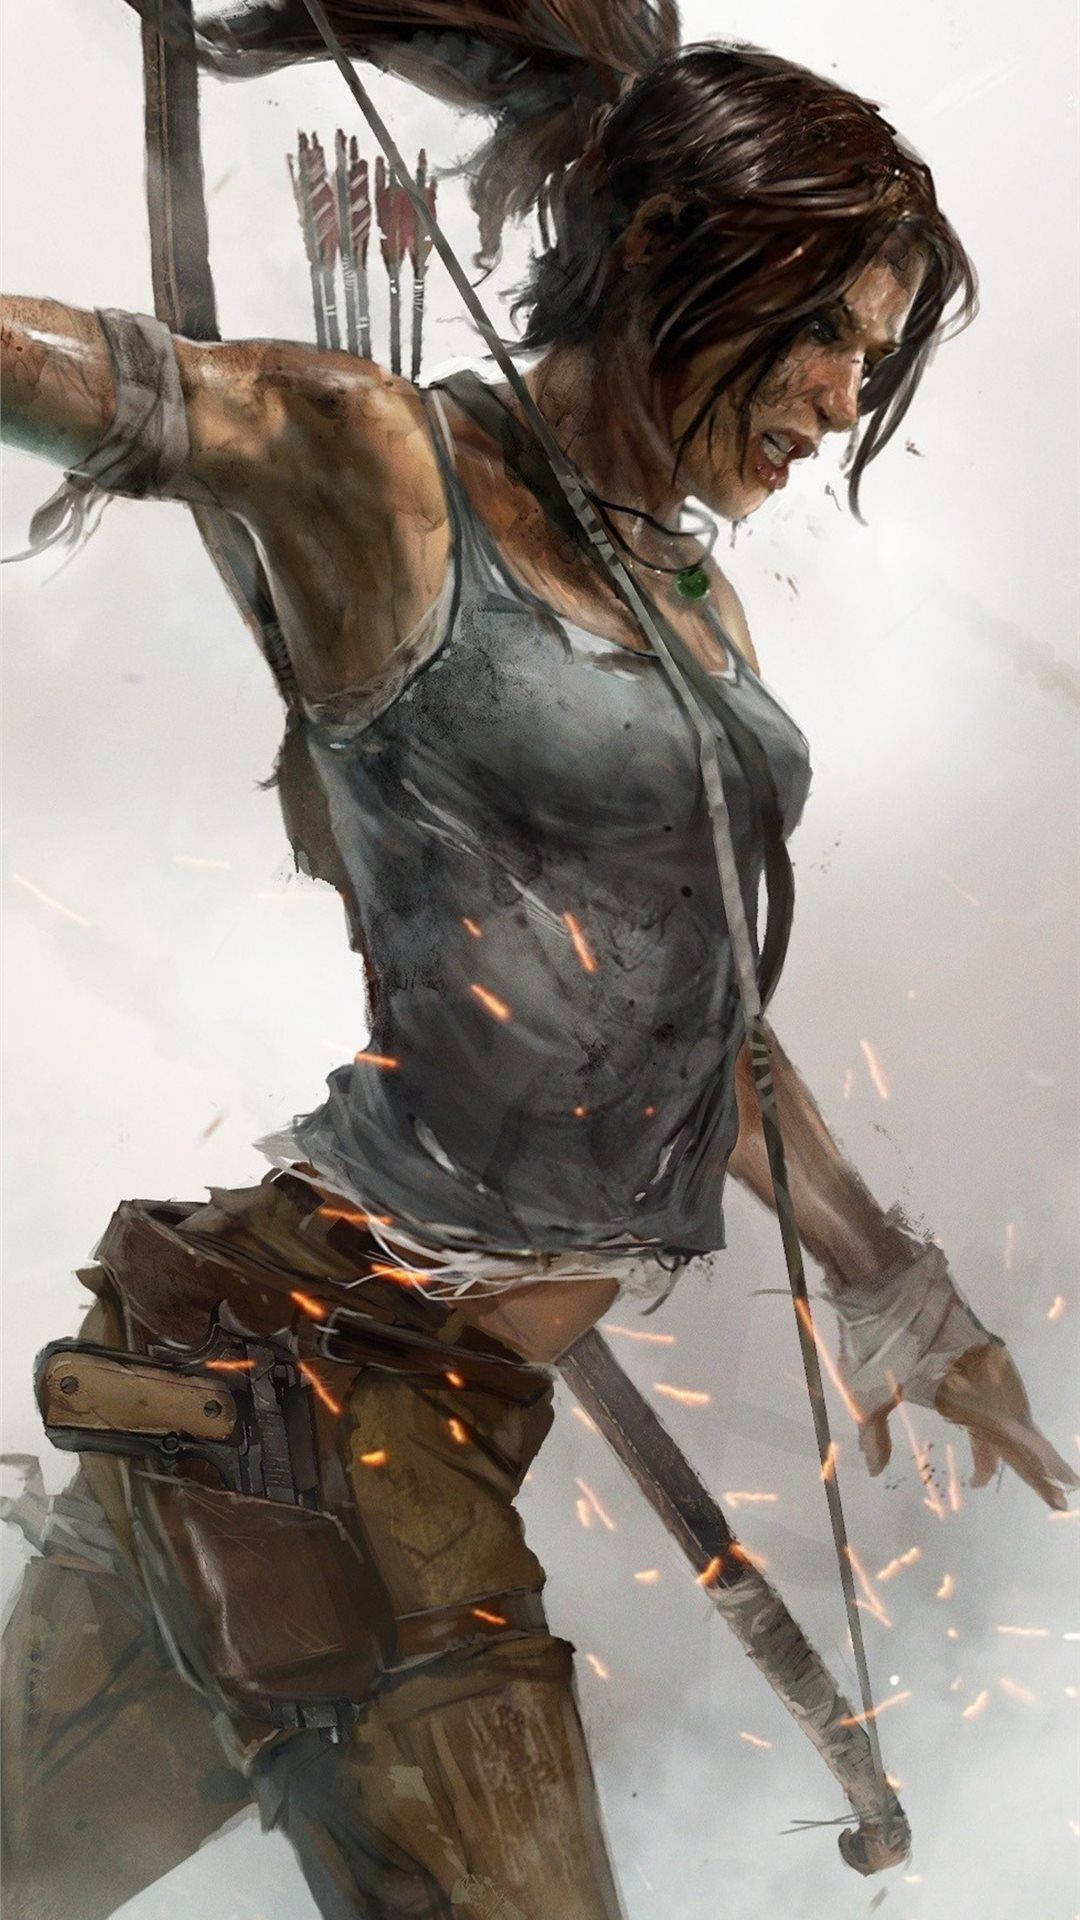 Unearth the tomb of new adventures with Lara Croft on your Iphone Wallpaper